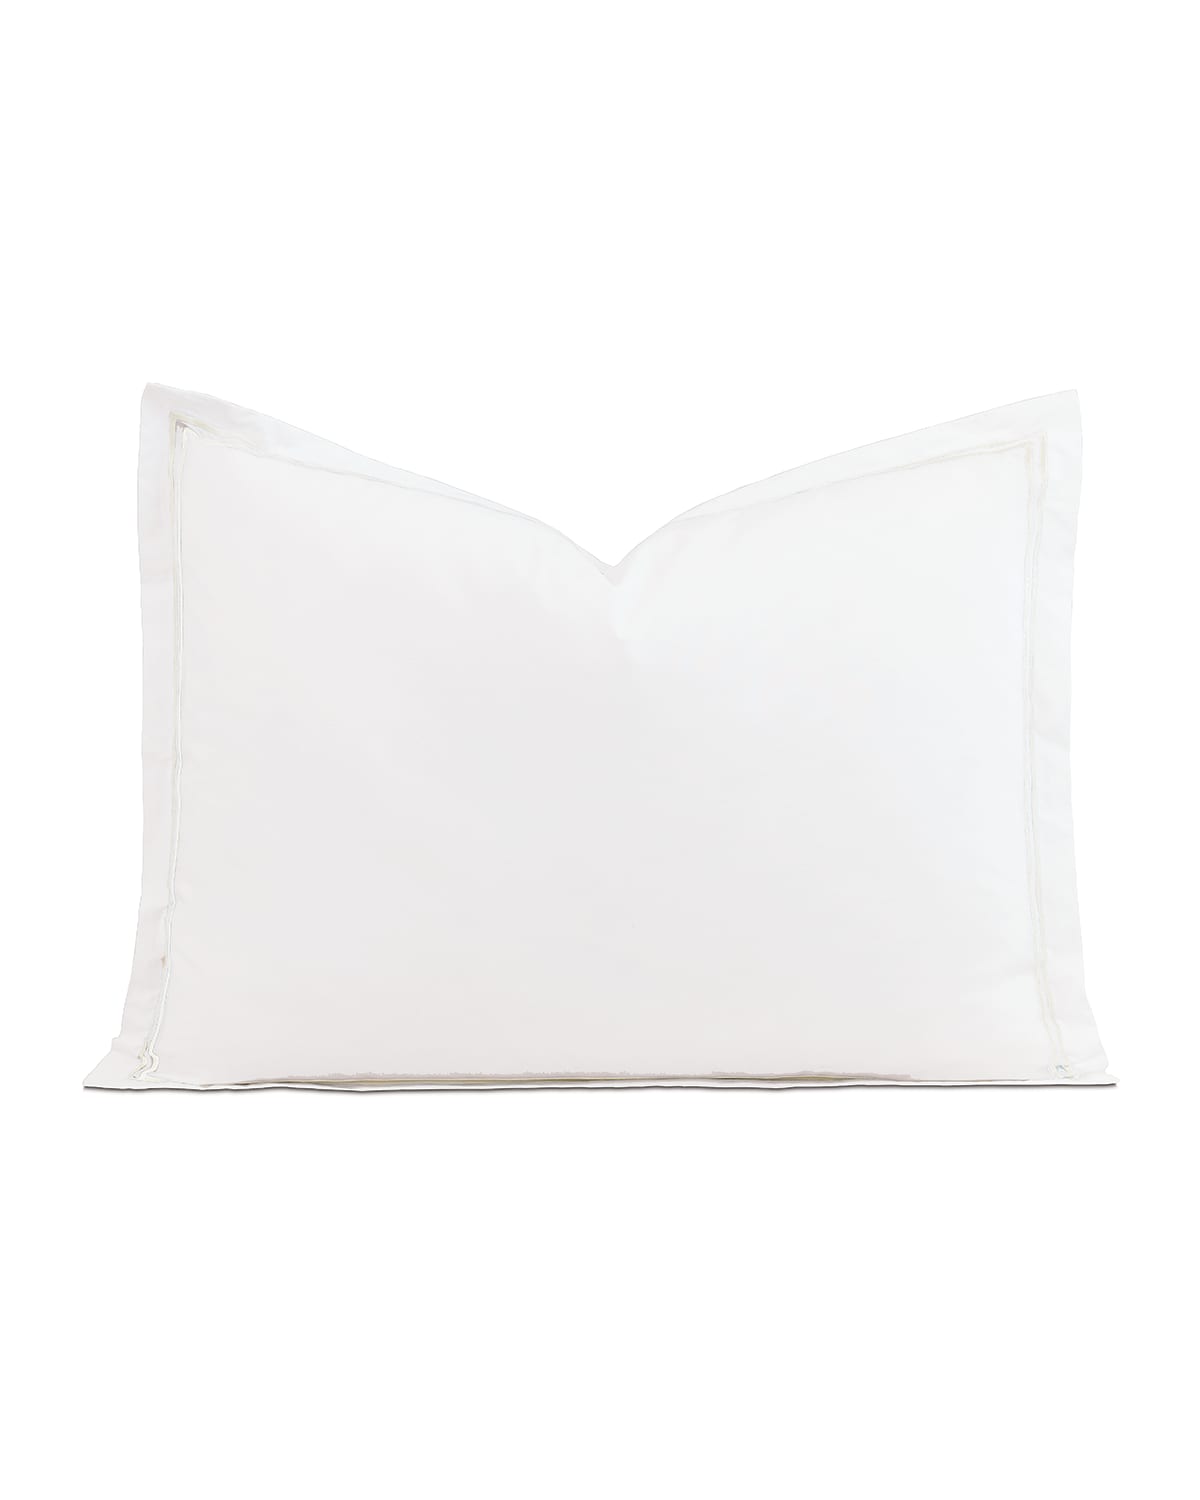 Eastern Accents Enzo Queen Pillowcase